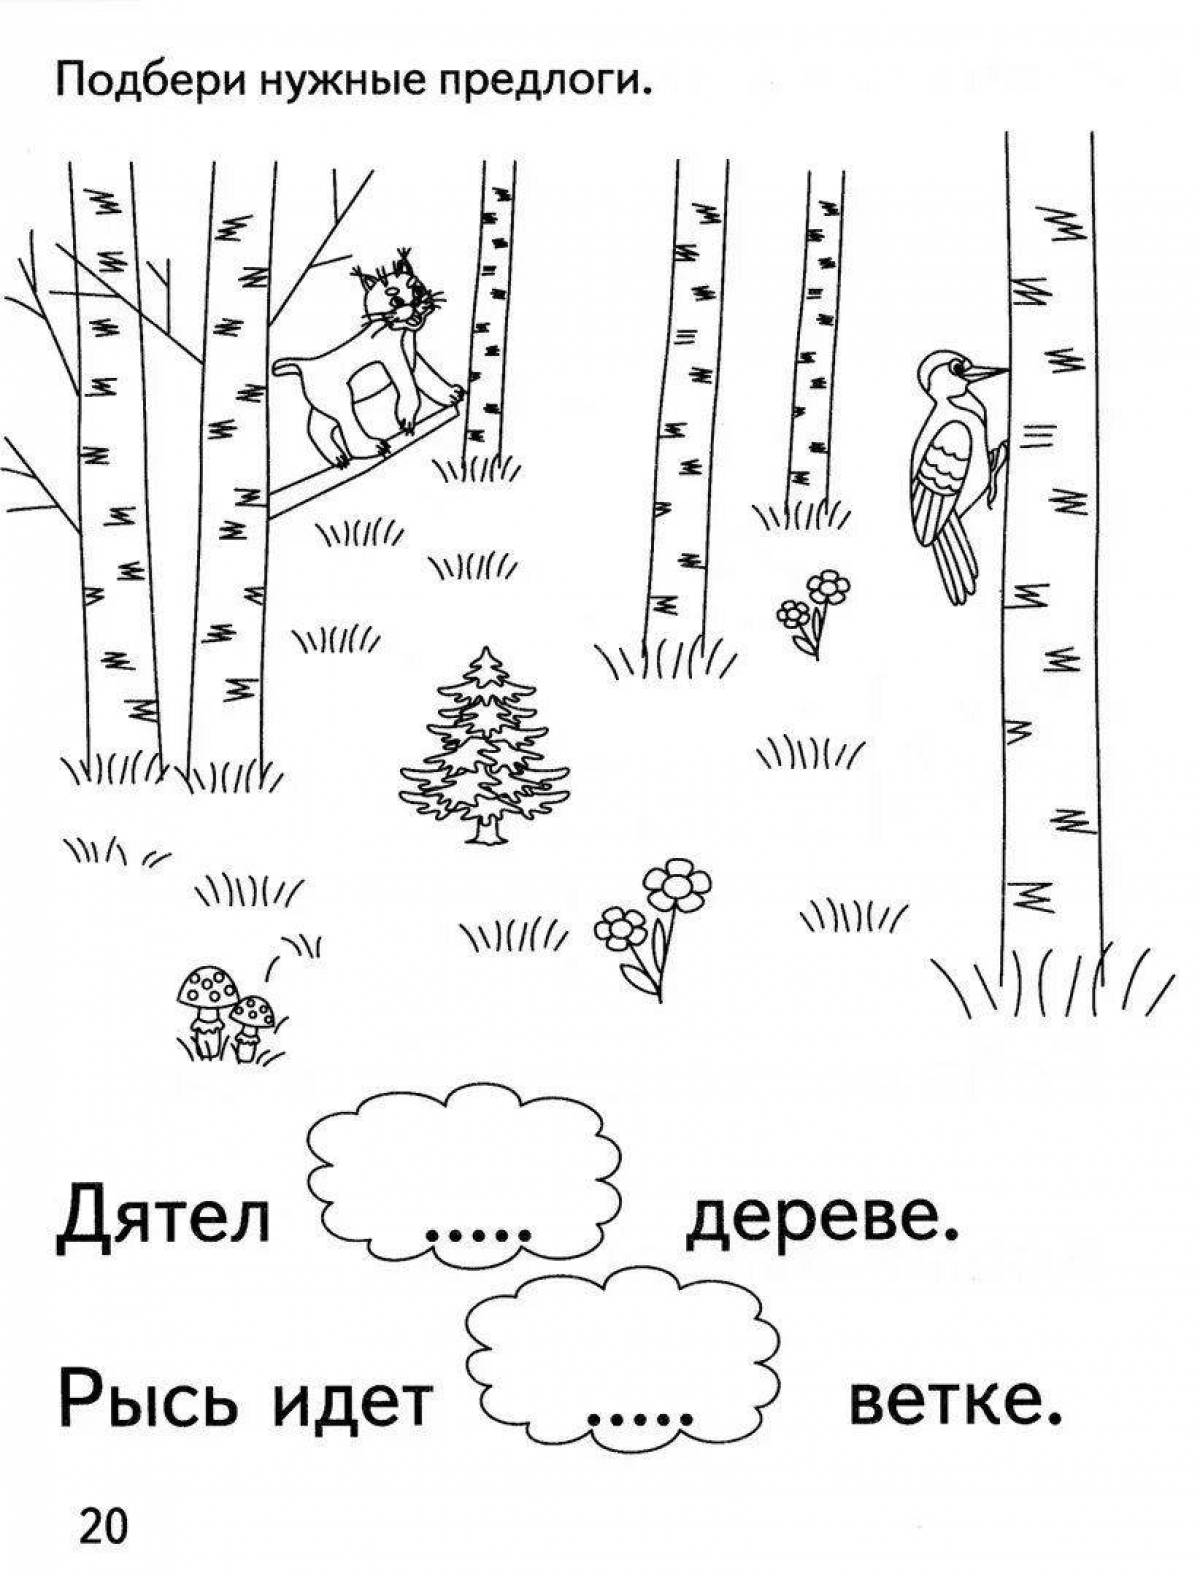 Coloring page with prepositions